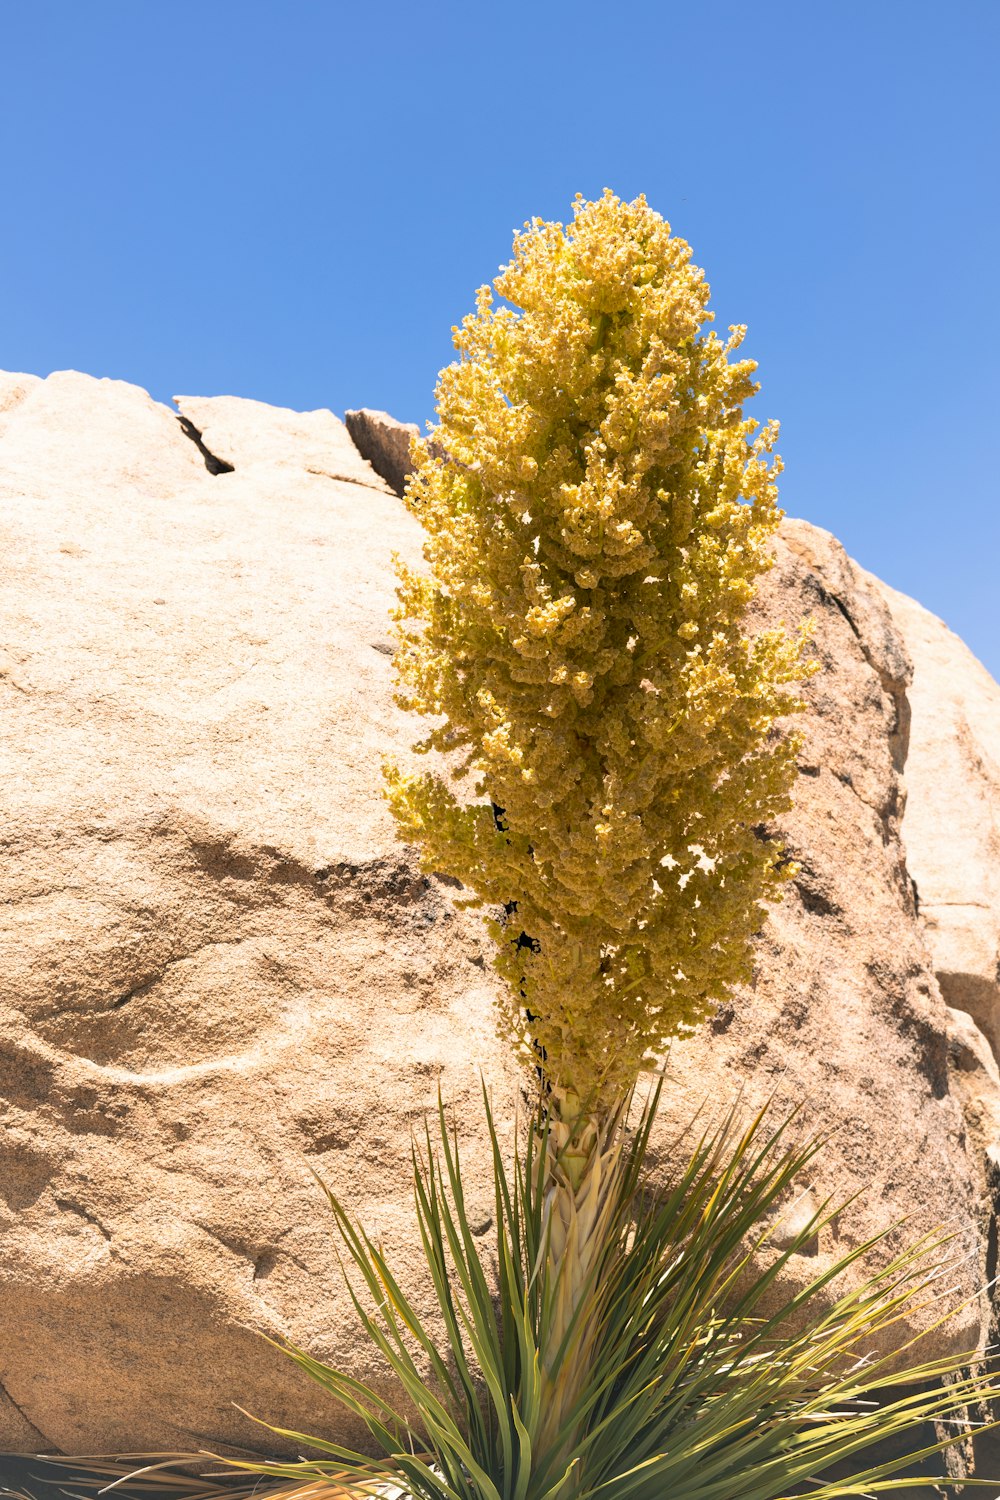 a small yellow plant in front of a large rock